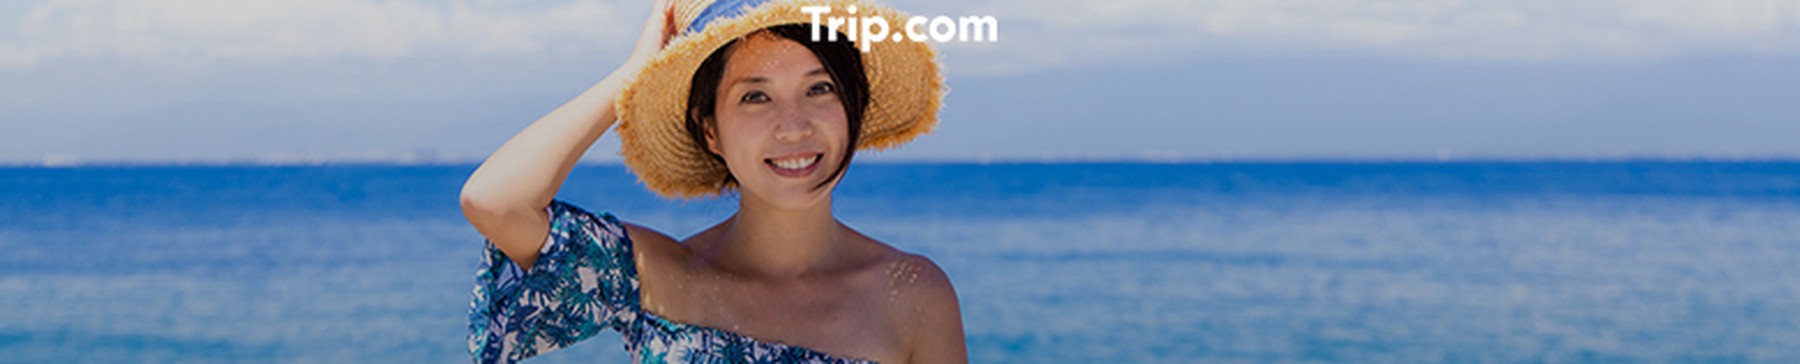 Get up to $100 OFF Scoot tickets on Trip.com